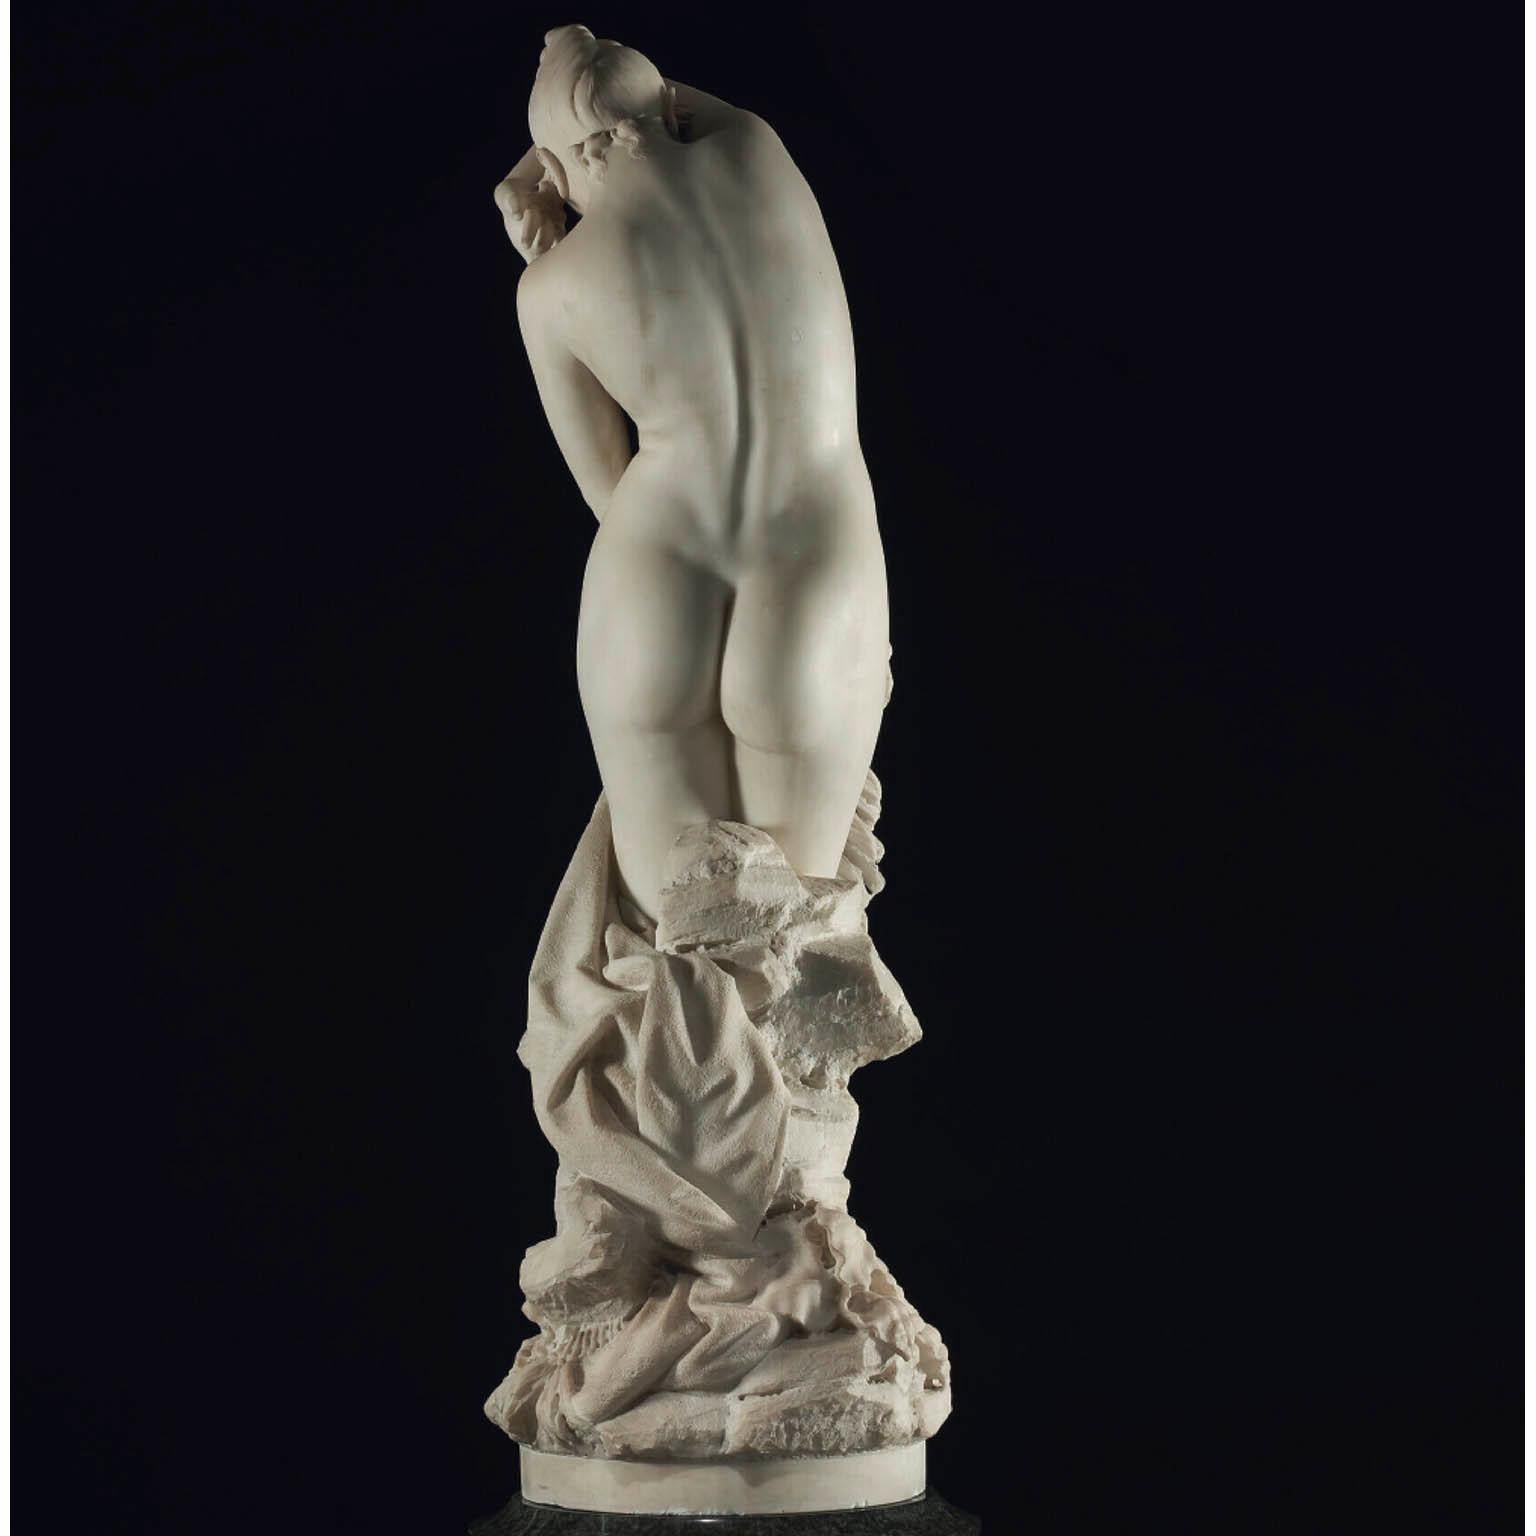 Hand-Carved Pietro Bazzanti a Carved Marble Figure Semi-Nude Young Bather Girl For Sale